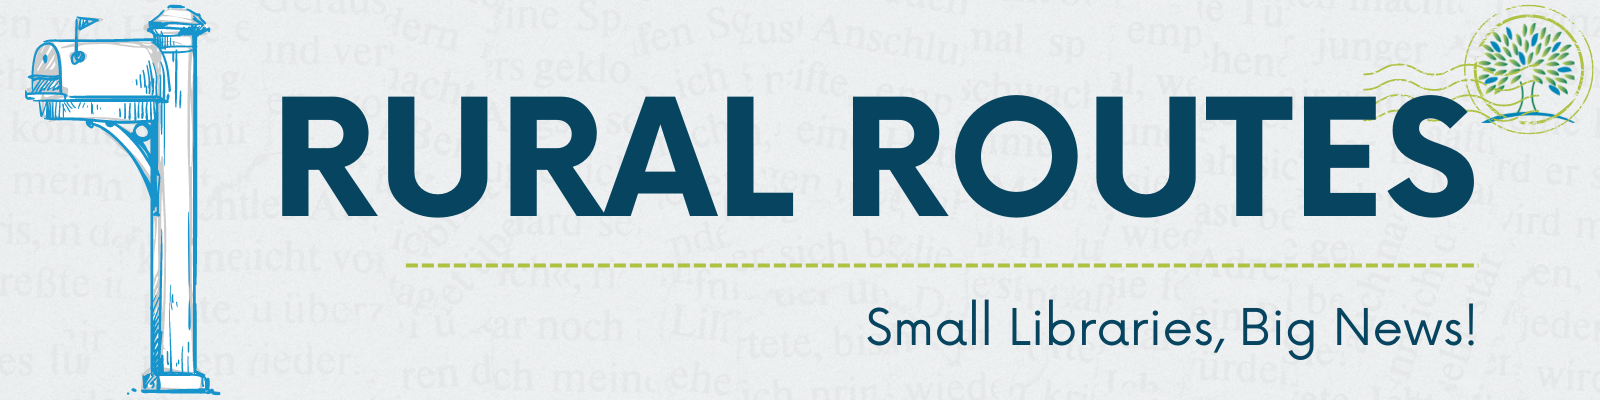 Rural Routes: Small Libraries, Big News blog banner image, featuring a blue mailbox in sketch style and the ARSL logo inside a postmark design.